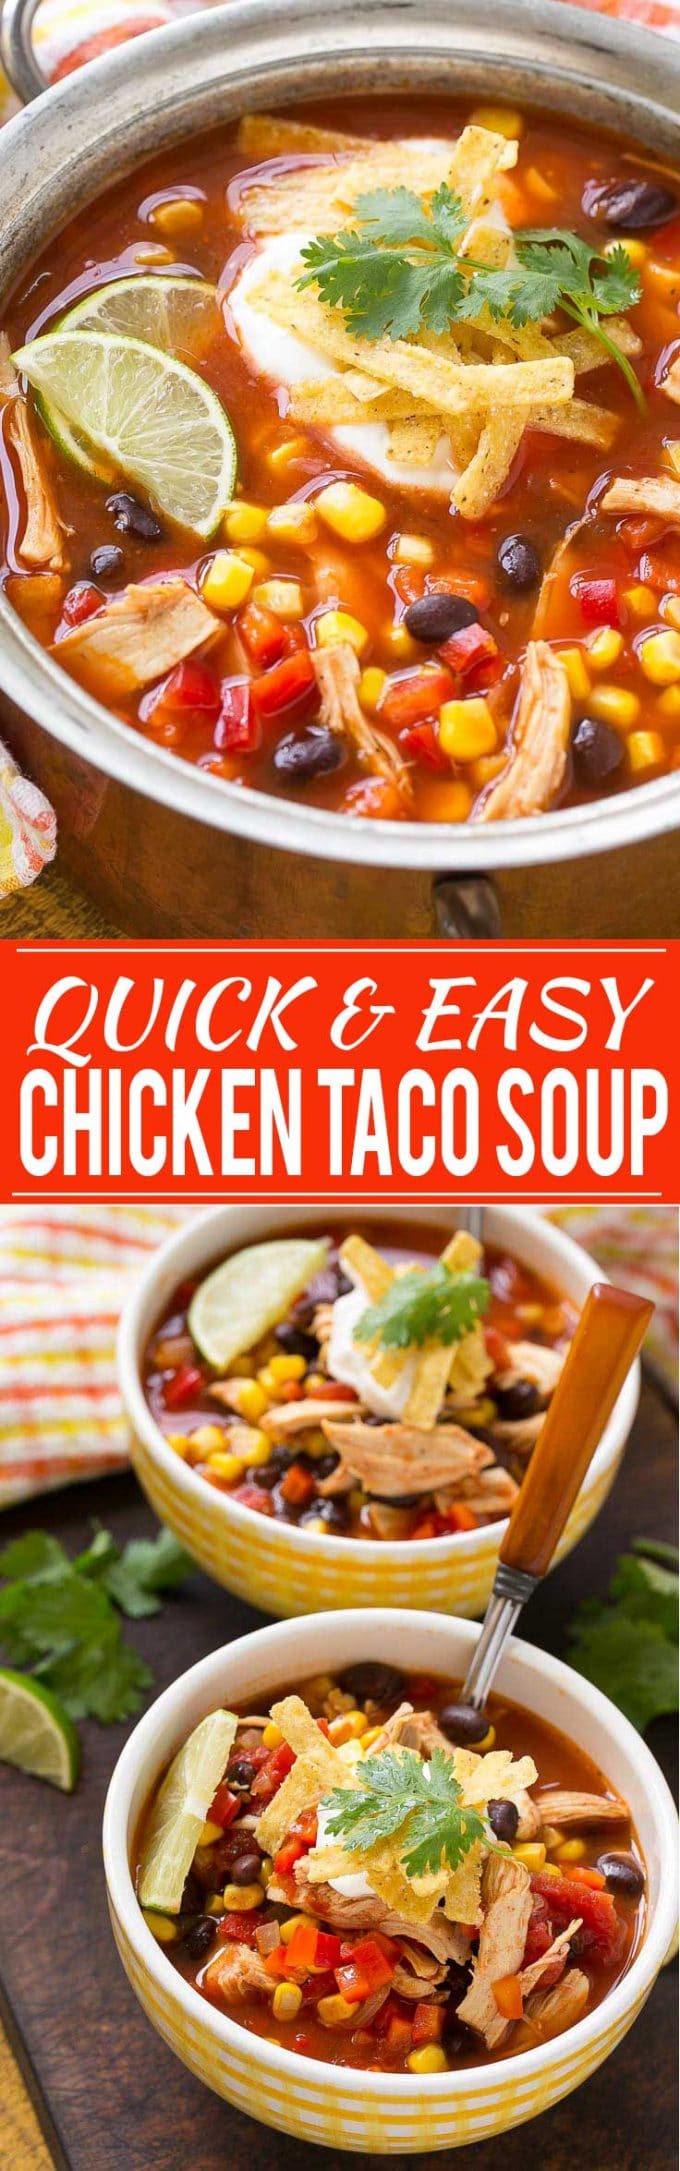 Quick and Easy Chicken Taco Soup Recipe | Chicken Taco Soup | Easy Chicken Taco Soup | Best Chicken Taco Soup